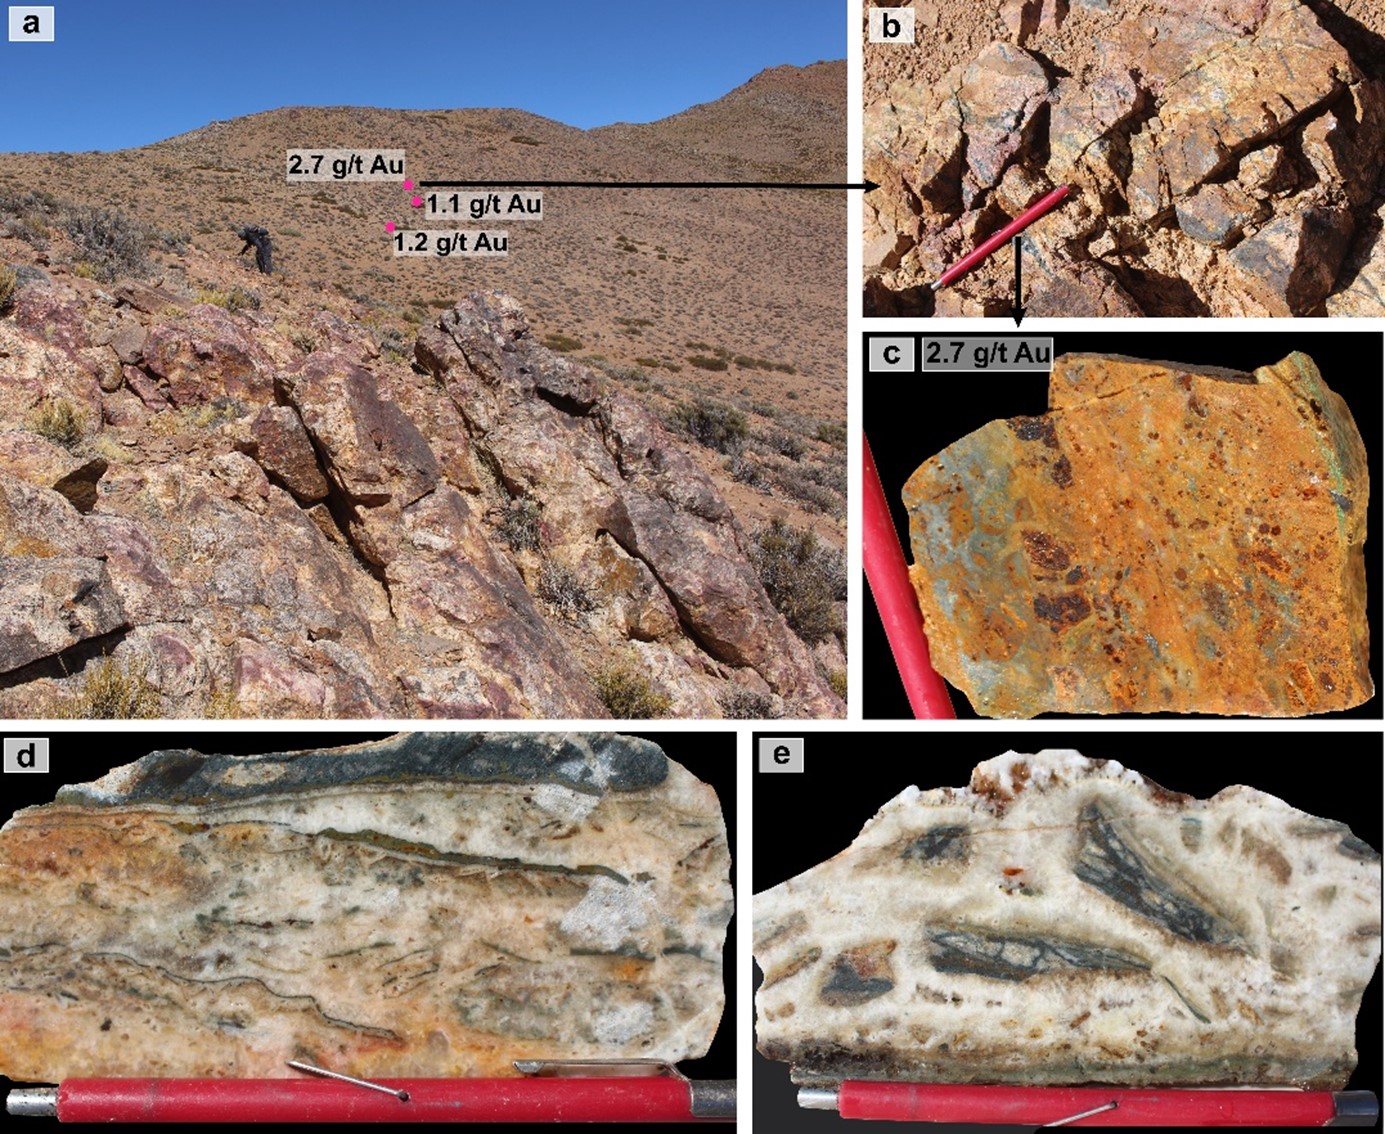 Machete epithermal vein zone. The veins and gold mineralization are hosted in strongly sericite-altered granodiorite (a), with quartz veinlets (b) and portions brecciated with green/grey silica and iron oxides and jarosite. Float in the area includes samples of finely banded silica and iron oxide (d) and breccia with matrix of crystalline quartz (comb texture) with fragments of finally banded silica and iron oxides after sulphides (e), both textures typical of epithermal veins.